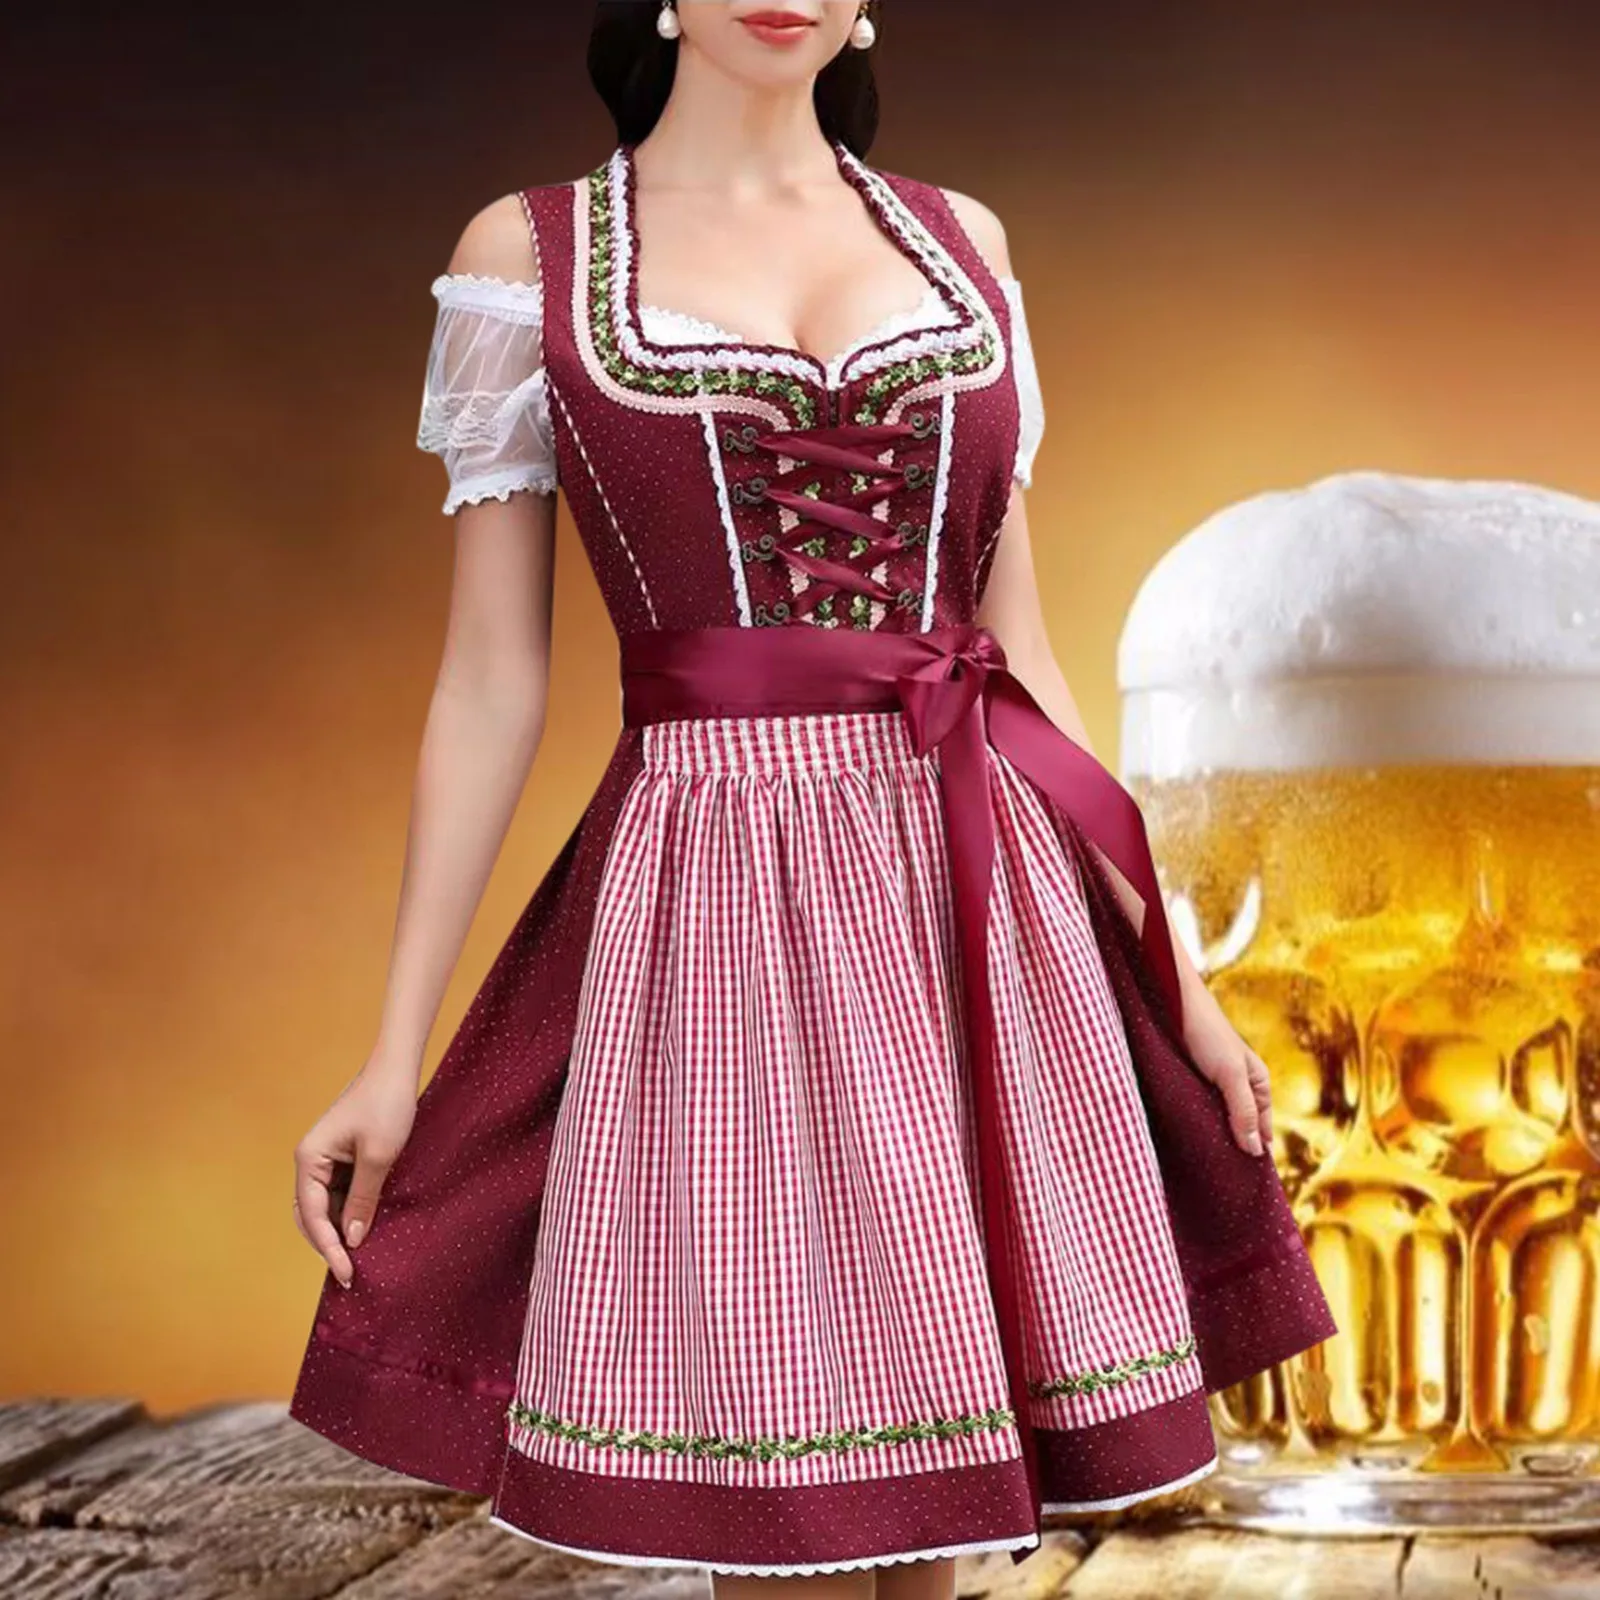 

Short Sleeve Lace-Up Plaid Embroider Dress Octoberfest Women Costume Dress Dirndl Traditional German Beer Festival Lady Clothing